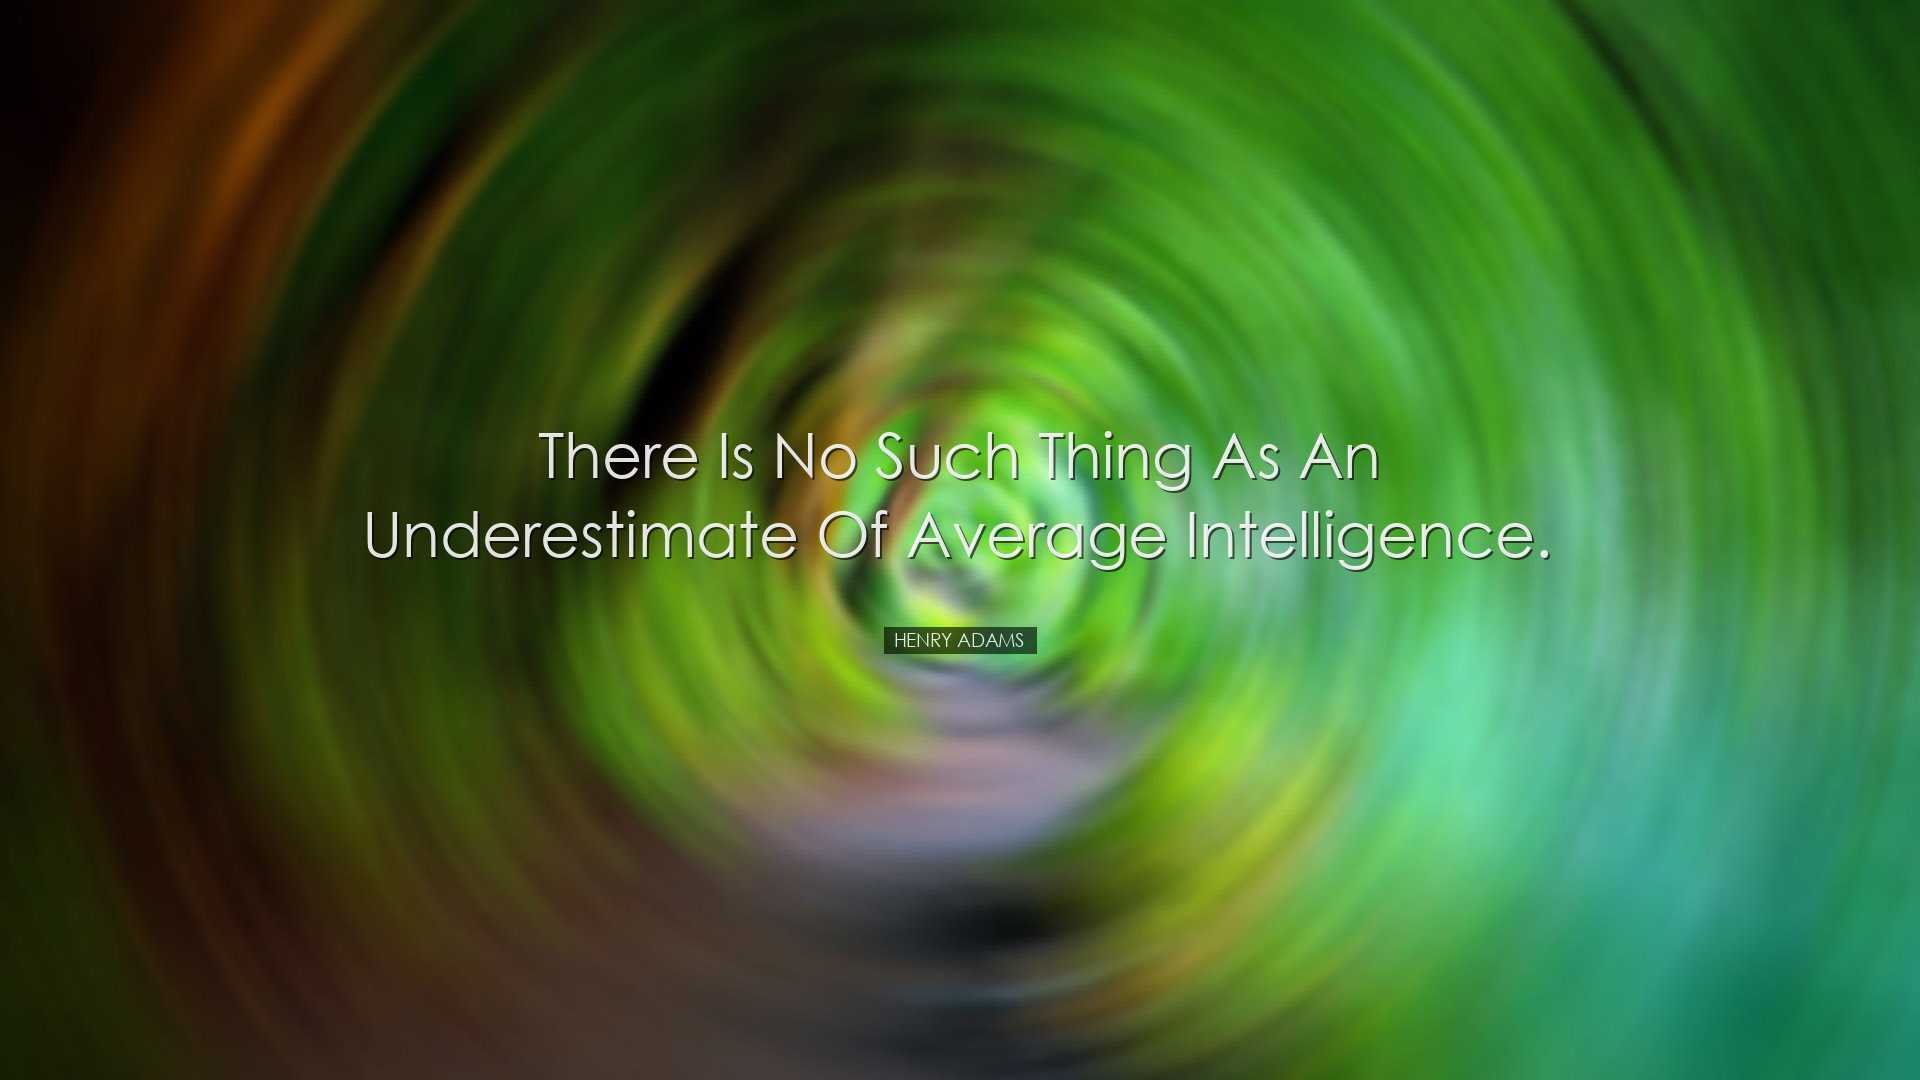 There is no such thing as an underestimate of average intelligence